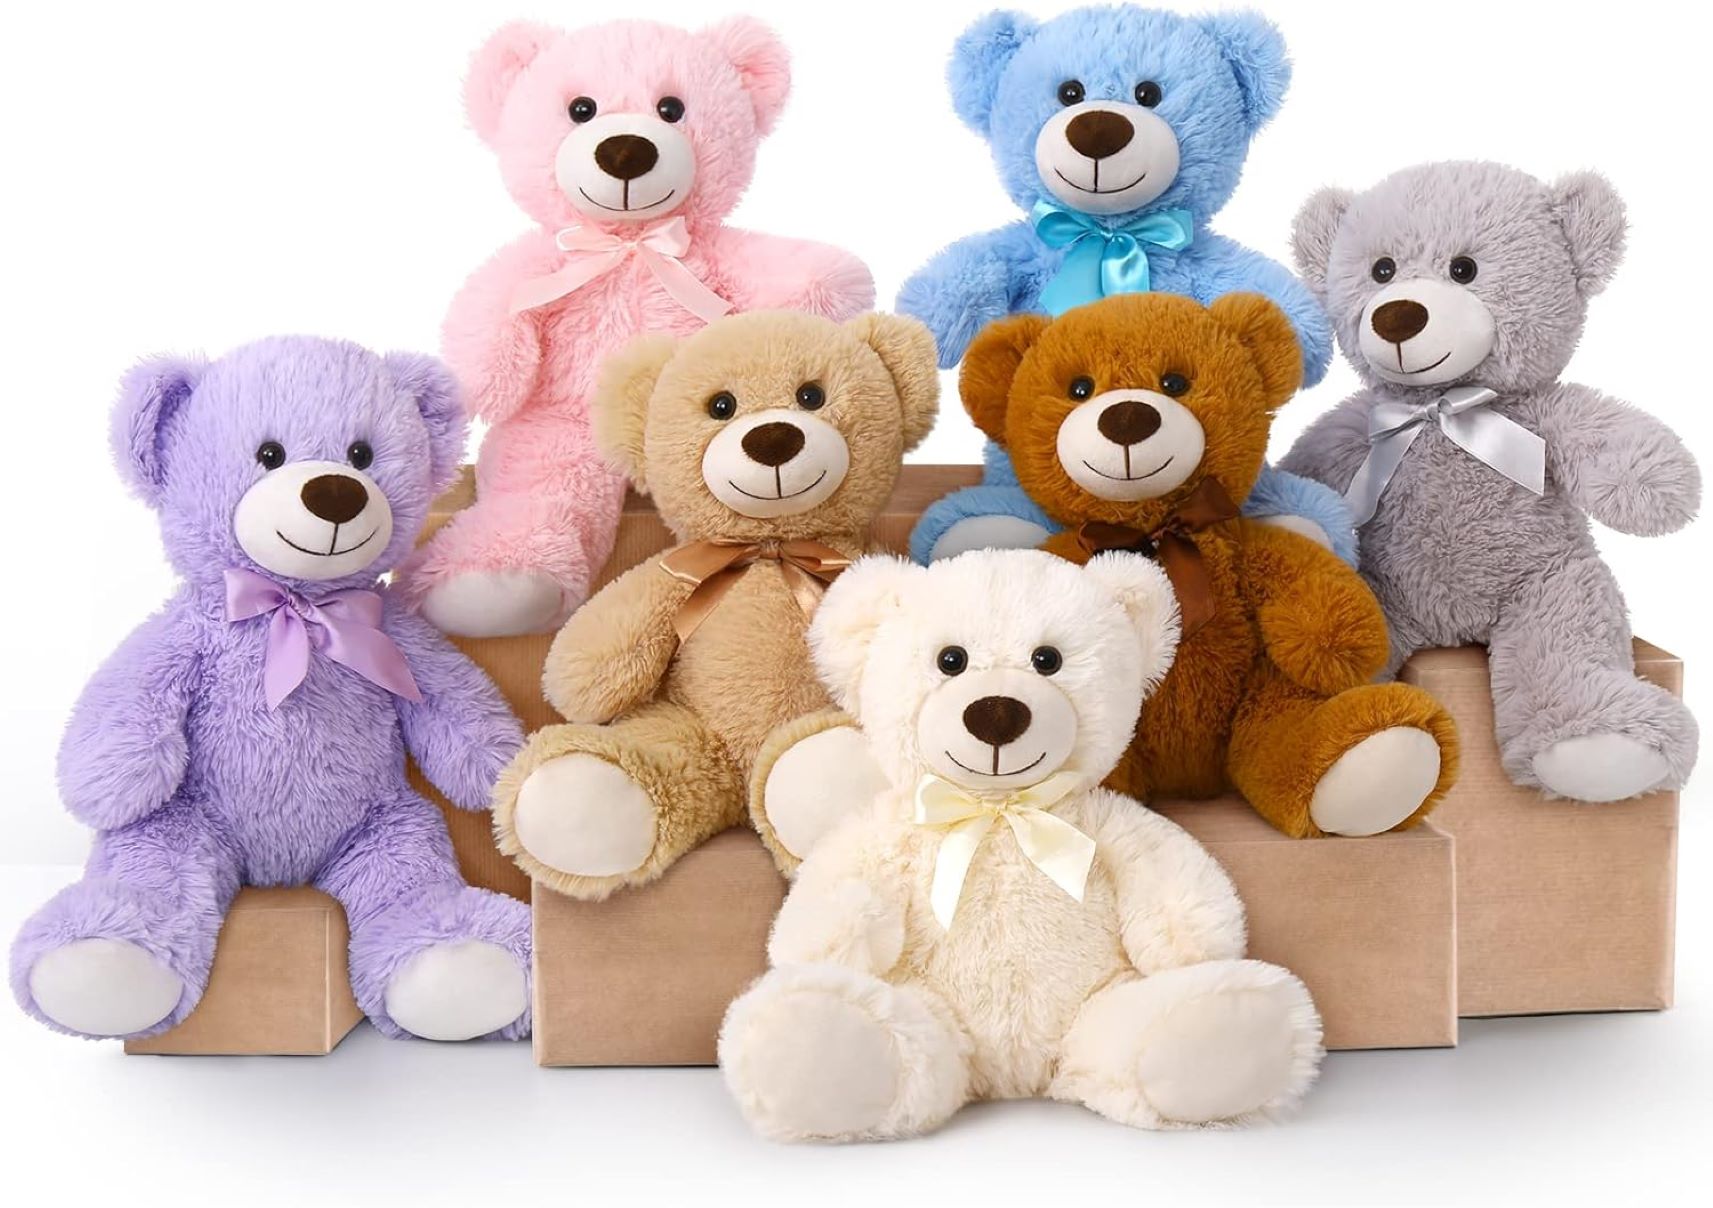 19-facts-about-teddy-bears